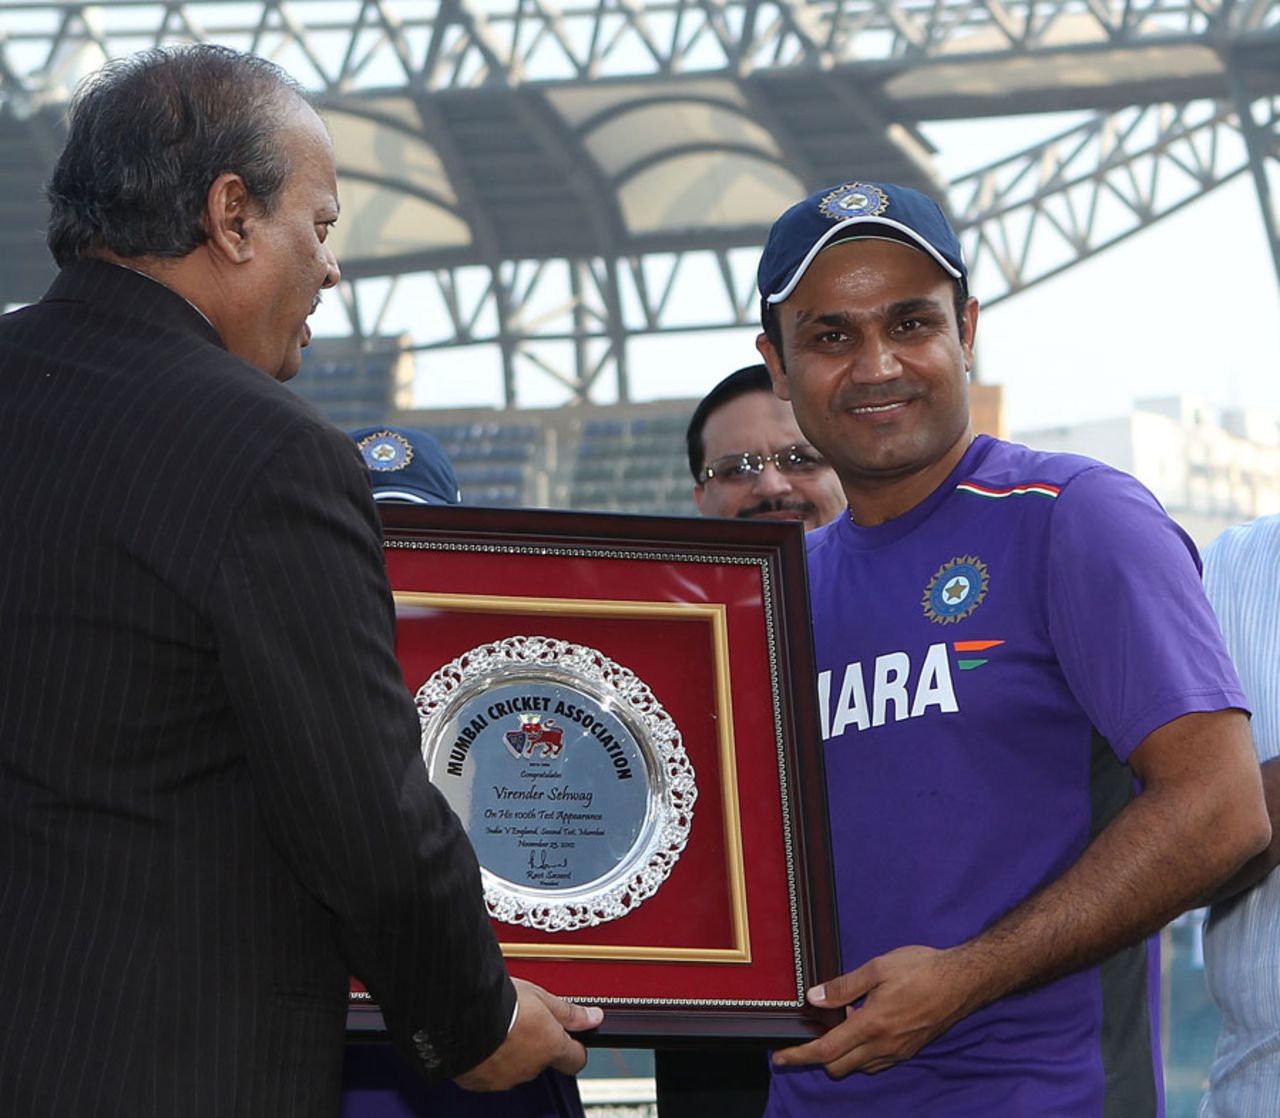 Virender Sehwag is felicitated on the morning of his 100th Test, India v England, 2nd Test, Mumbai, 1st day, November 23, 2012